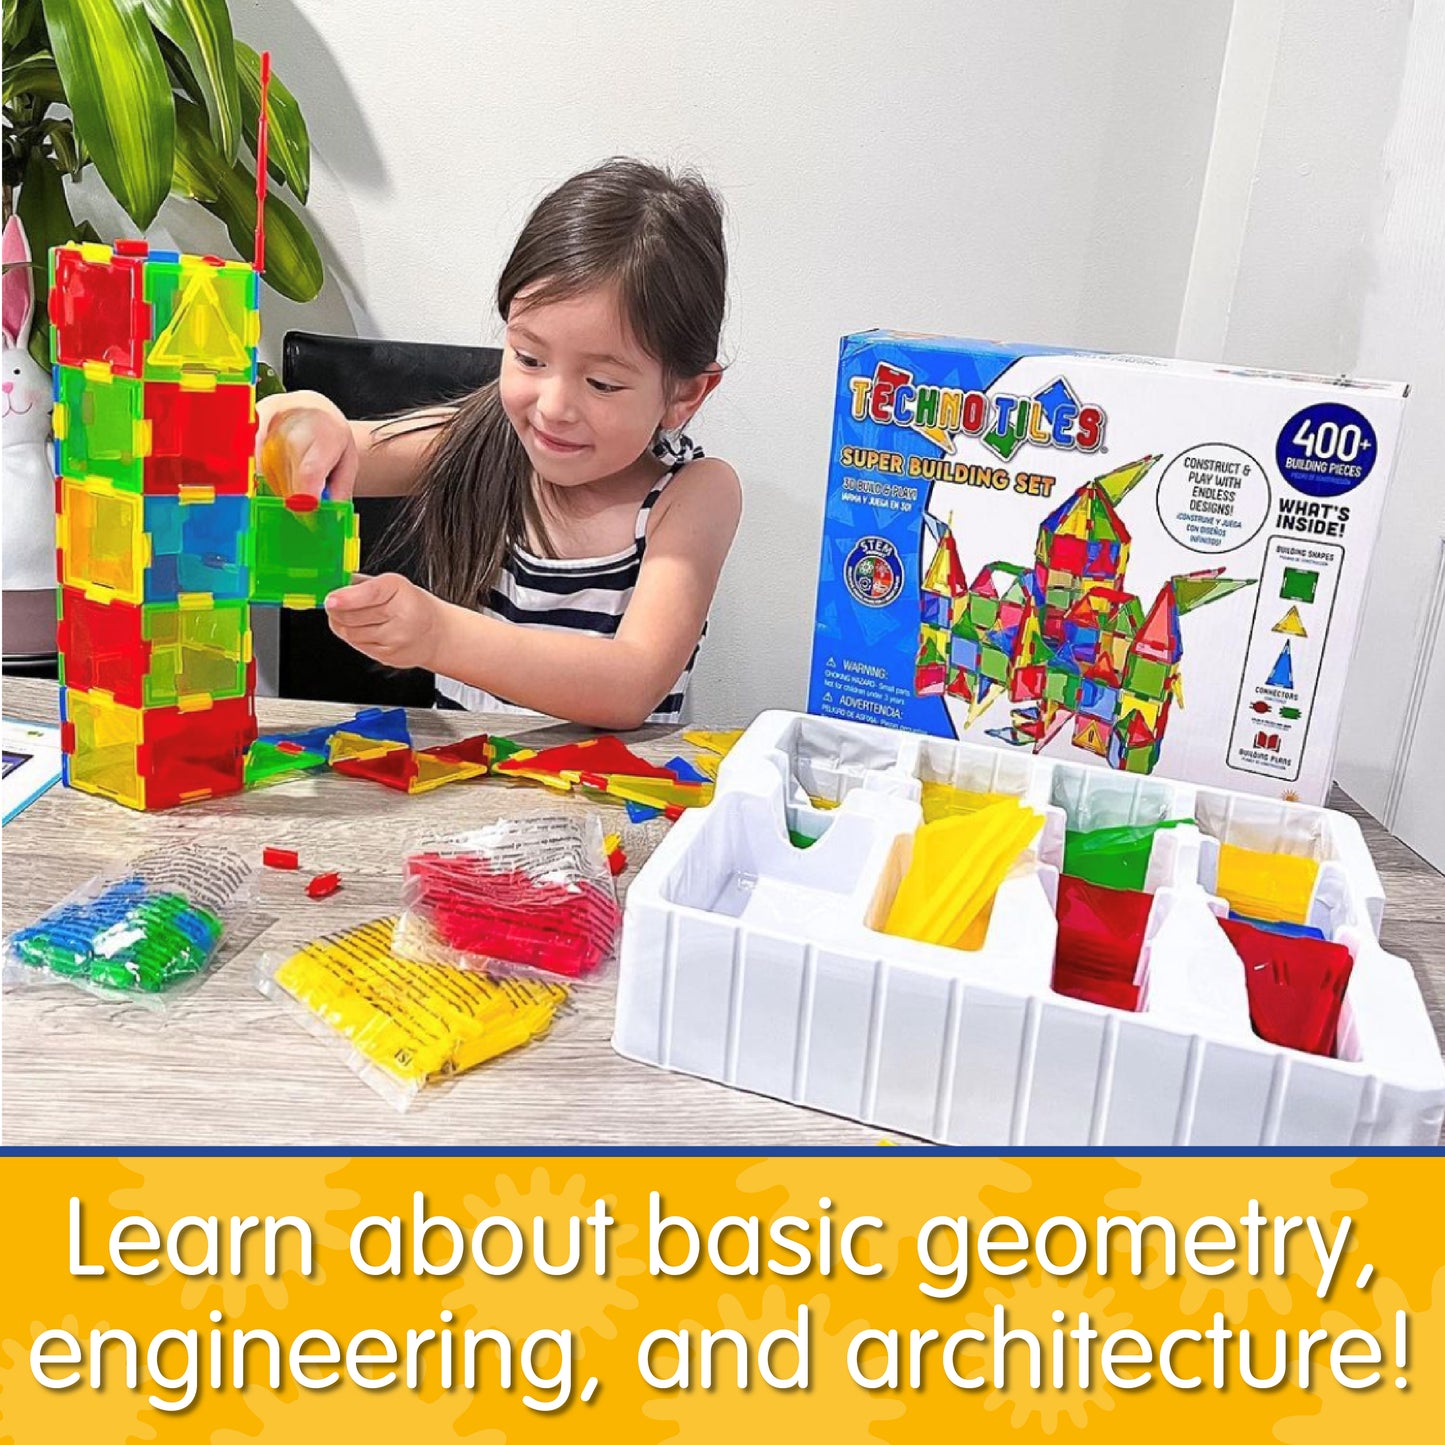 Infographic with girl playing with Techno Tiles that says, "Learn about basic geometry, engineering, and architecture!"